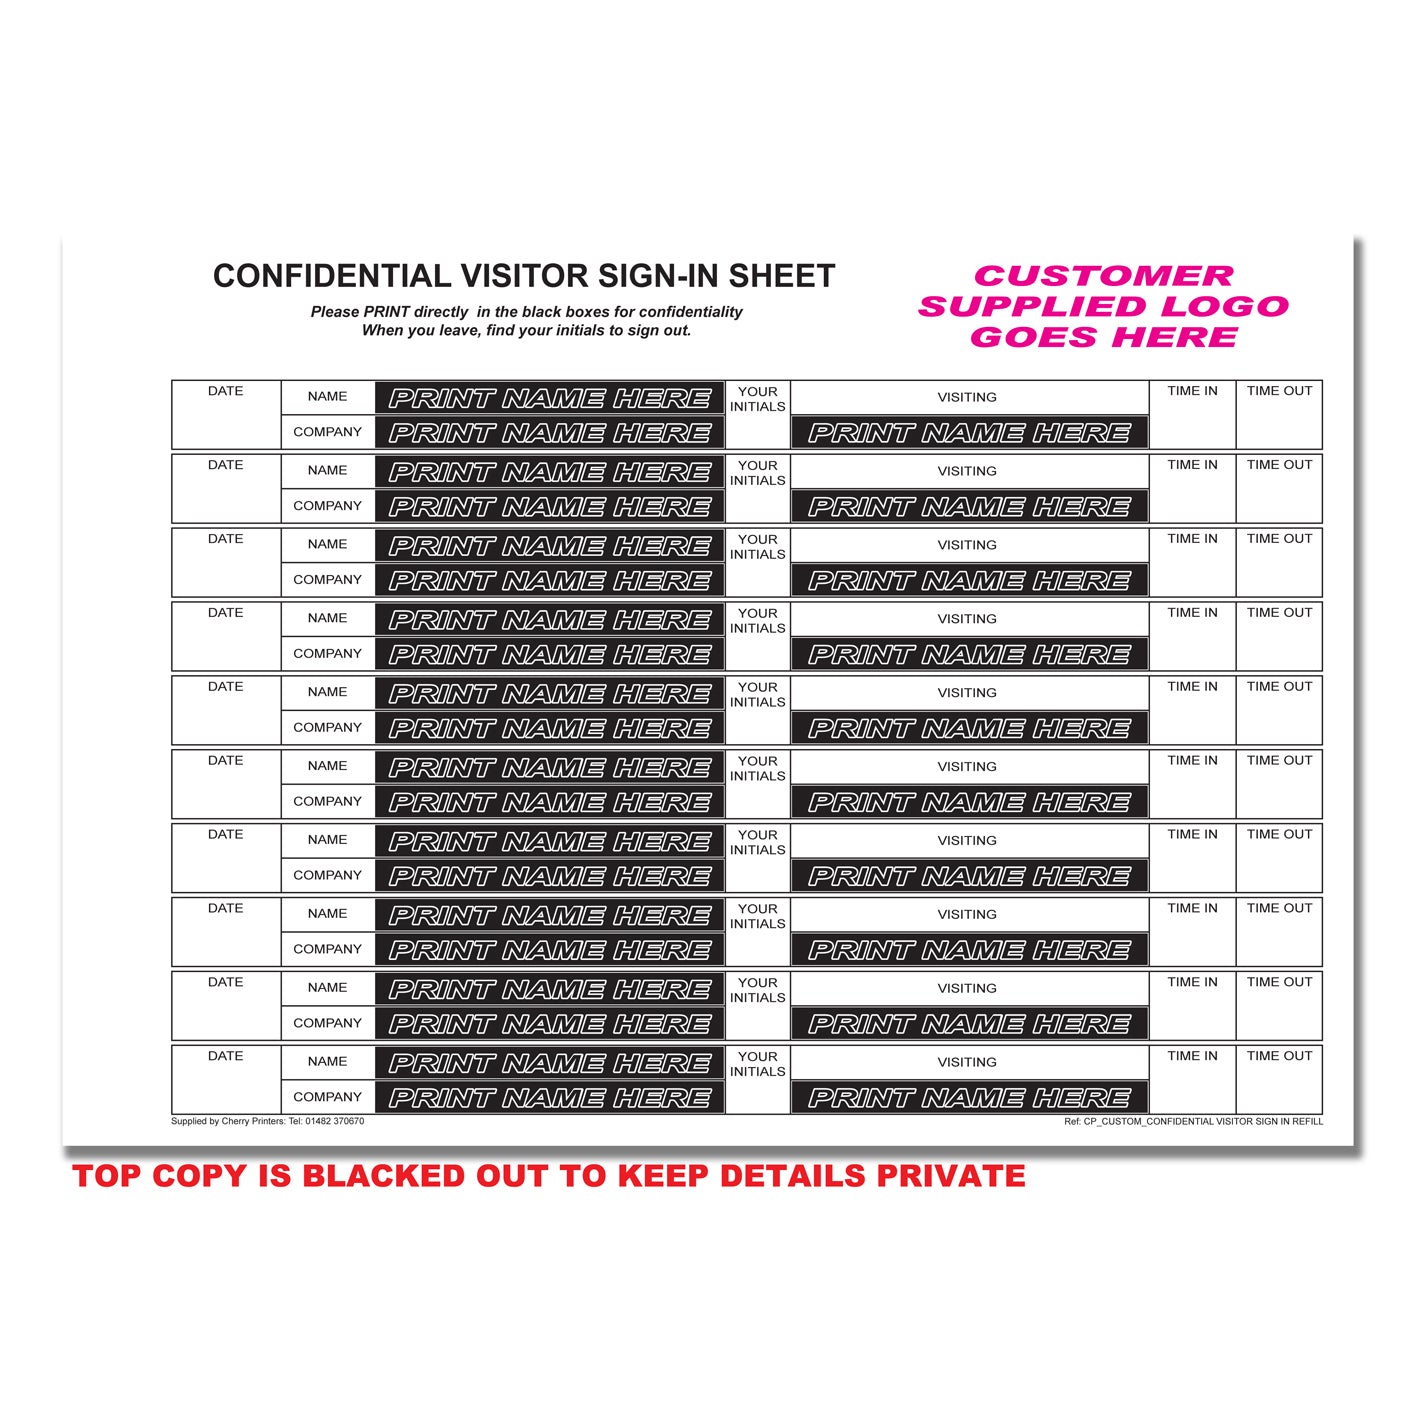 NCR *CUSTOM* Confidential Visitor Sign in Duplicate Refill A4 | 2 Refill Packs